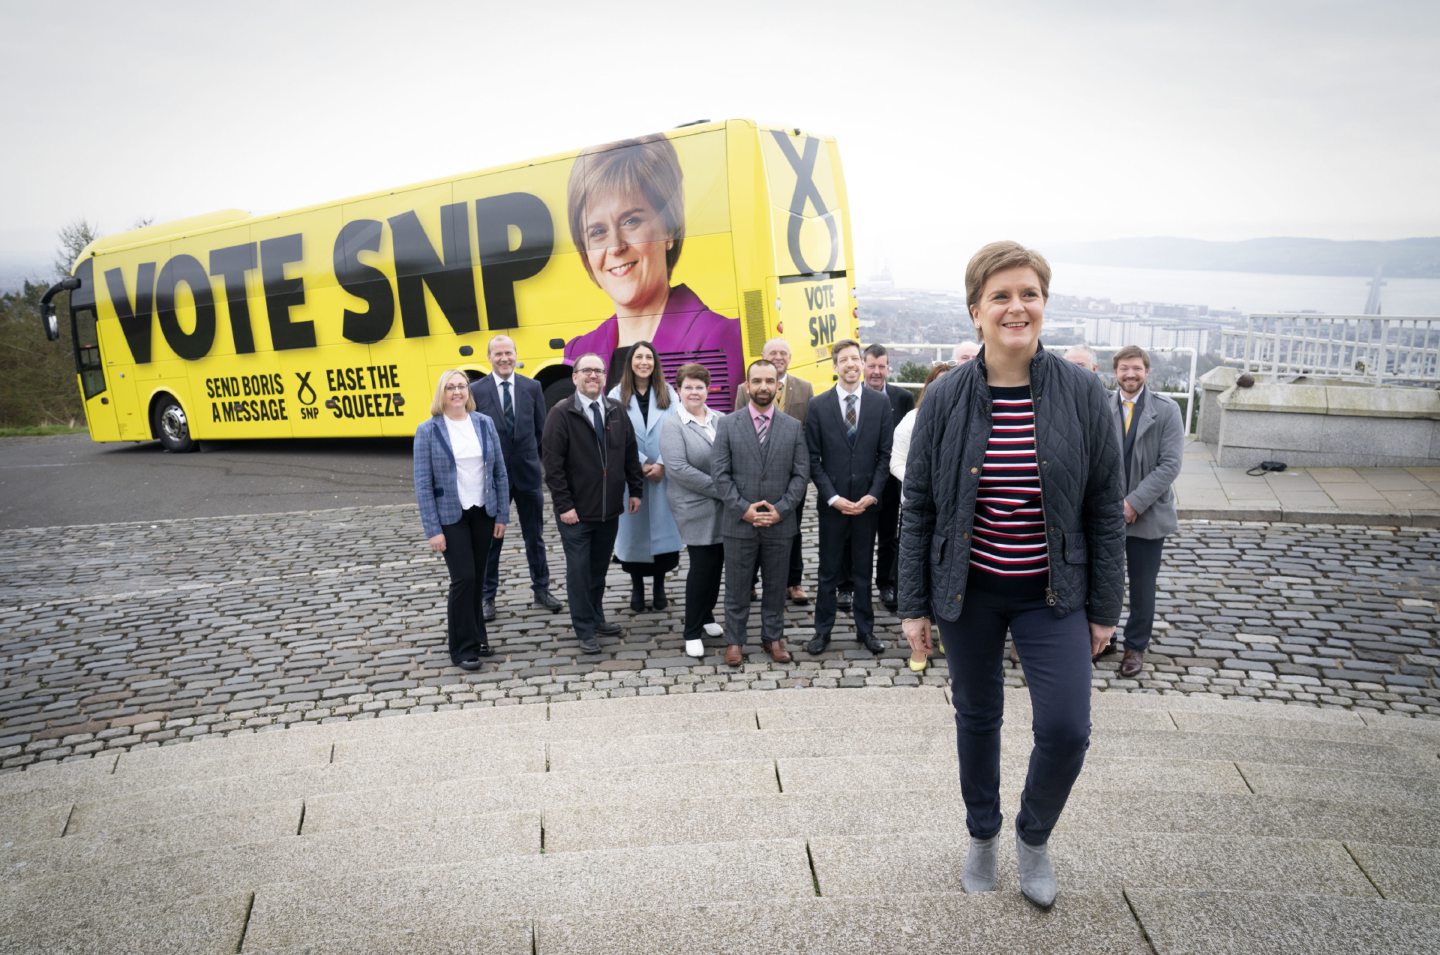 First Minister Nicola Sturgeon with candidates and party supporters at Dundee Law in Dundee at the launch for the SNP's campaign bus, which will tour Scotland in the 21 days before the local elections. Picture date: Friday April 15, 2022.  Jane Barlow/PA Wire